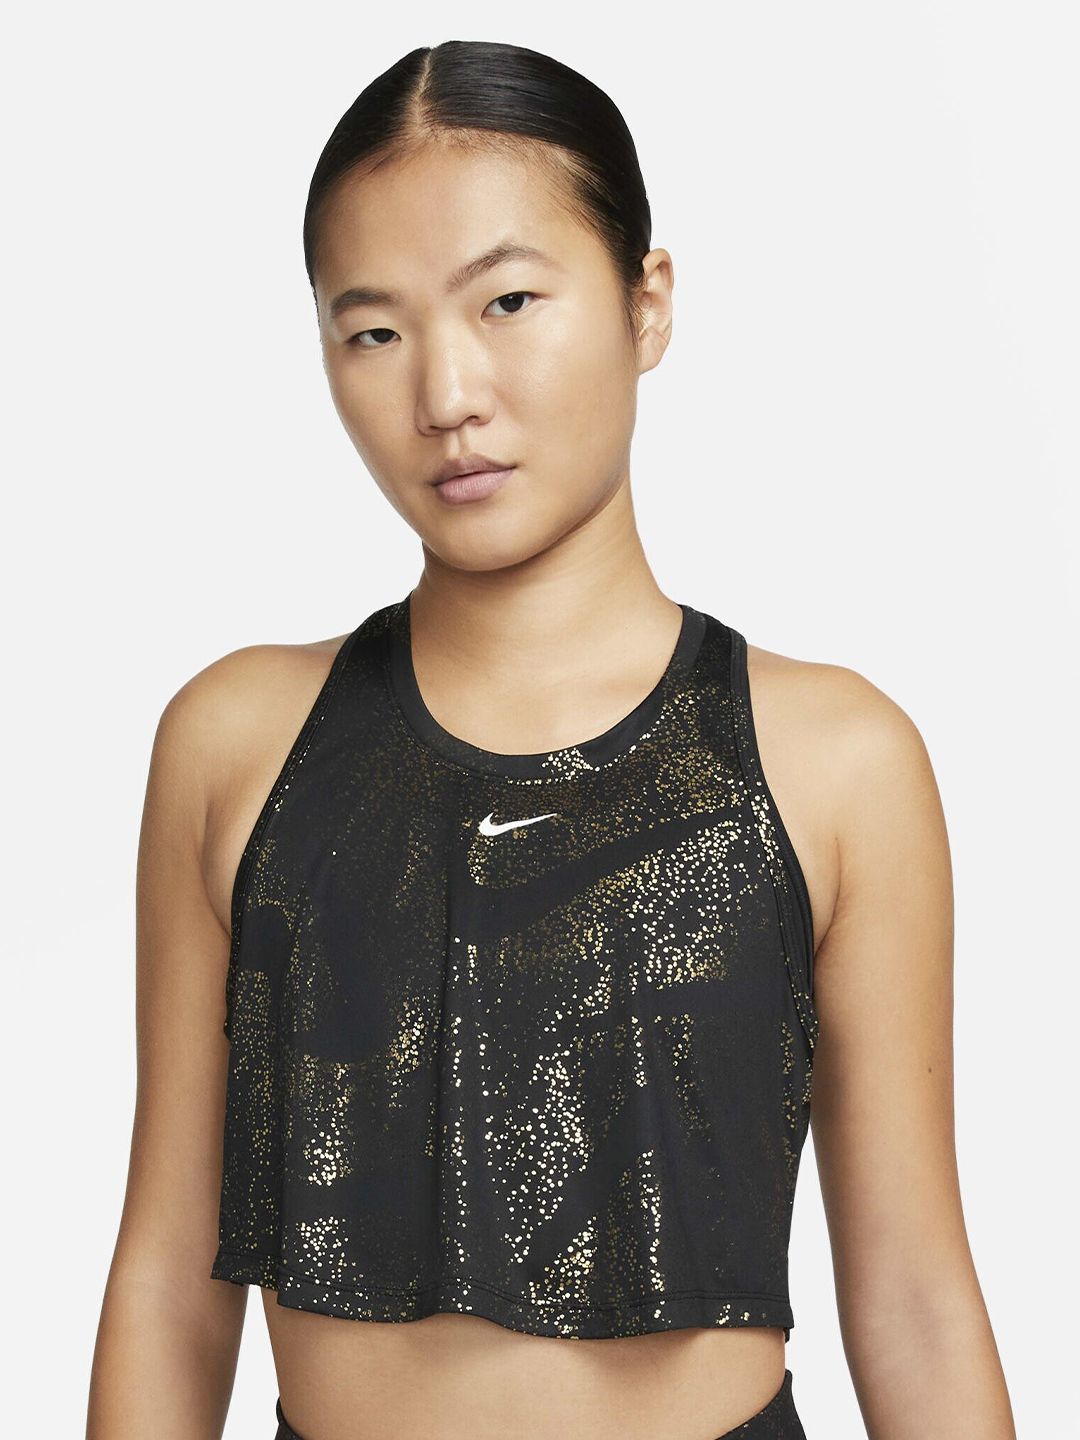 Nike Dry-Fit One Printed Training Tank Top Price in India